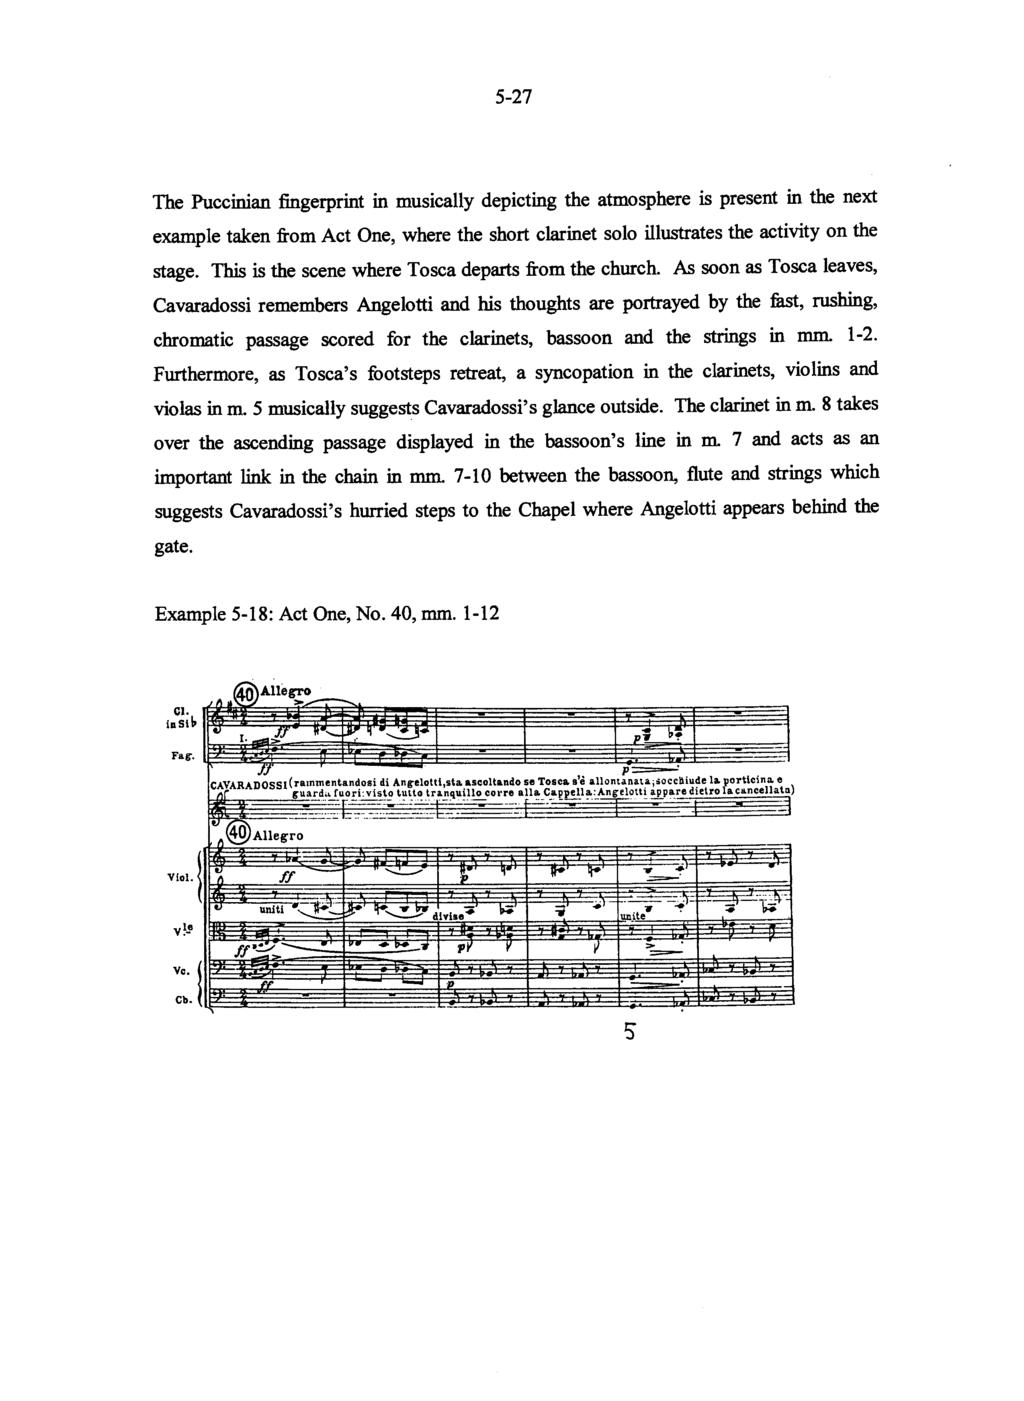 The Puccinian fingerprint in musically depicting the atmosphere is present in the next example taken from Act One, where the short clarinet solo illustrates the activity on the stage.